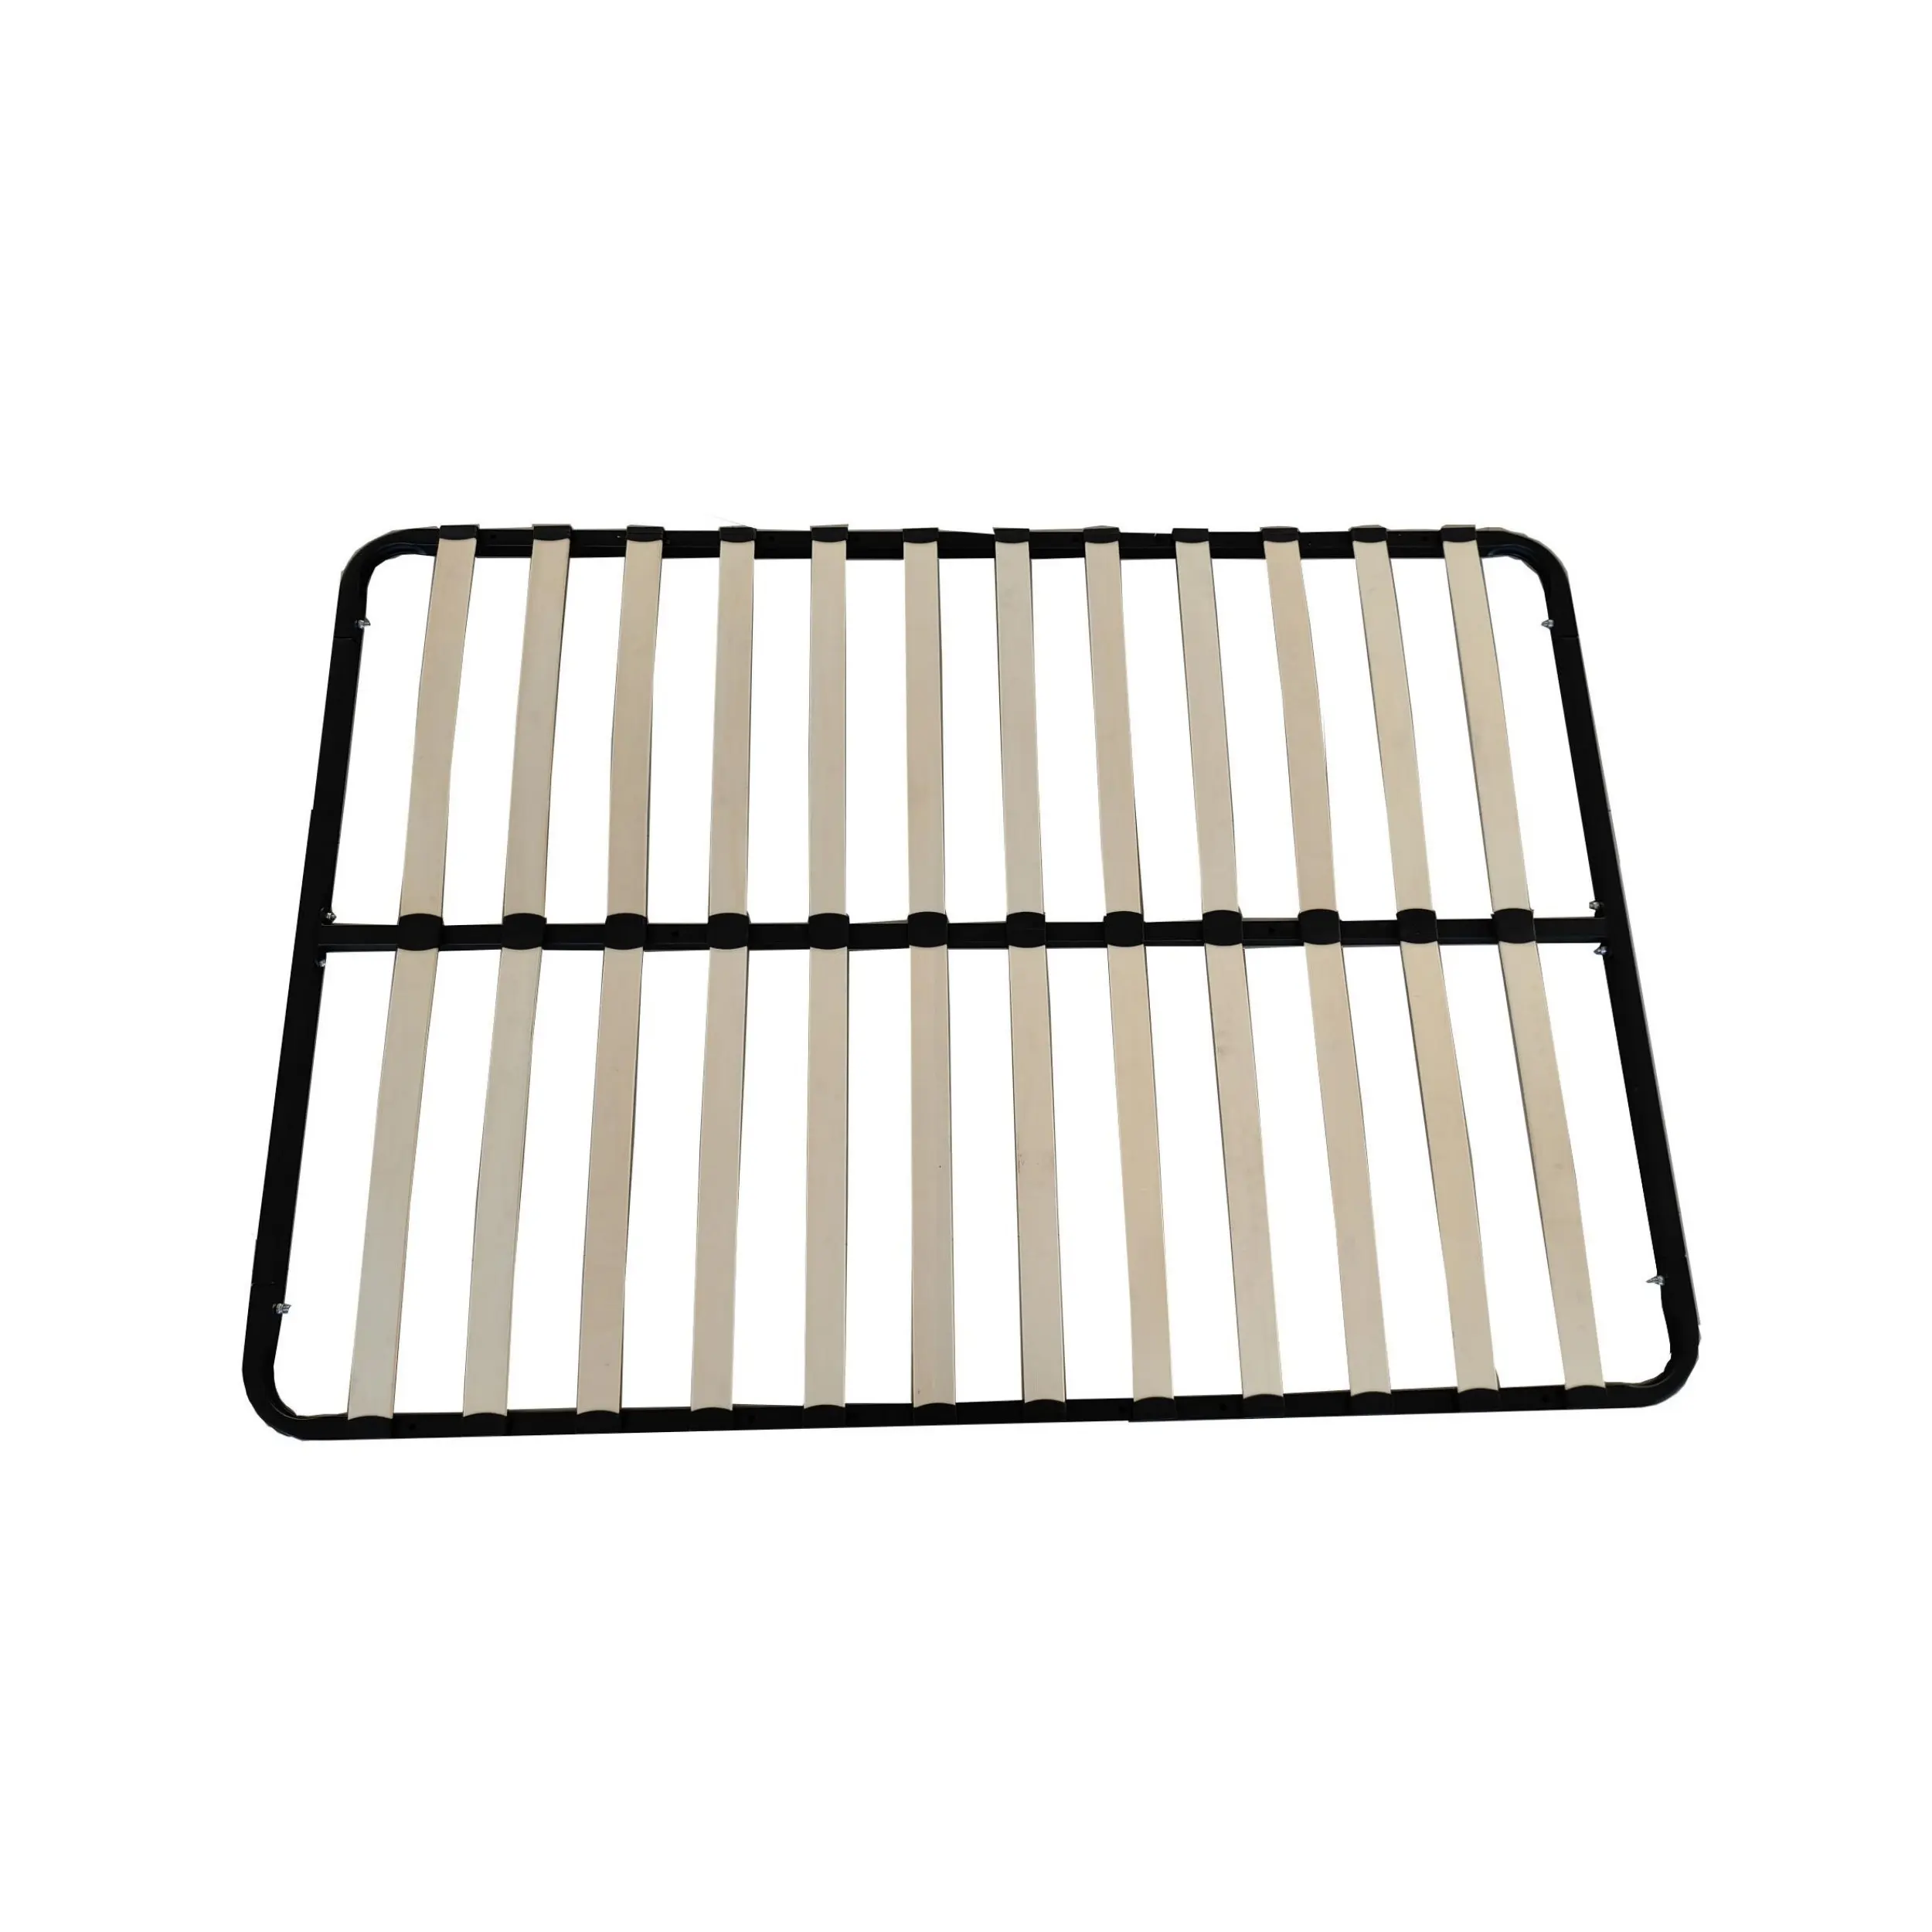 iron metal slatted bed frame king single size flat package easy installation mattress base